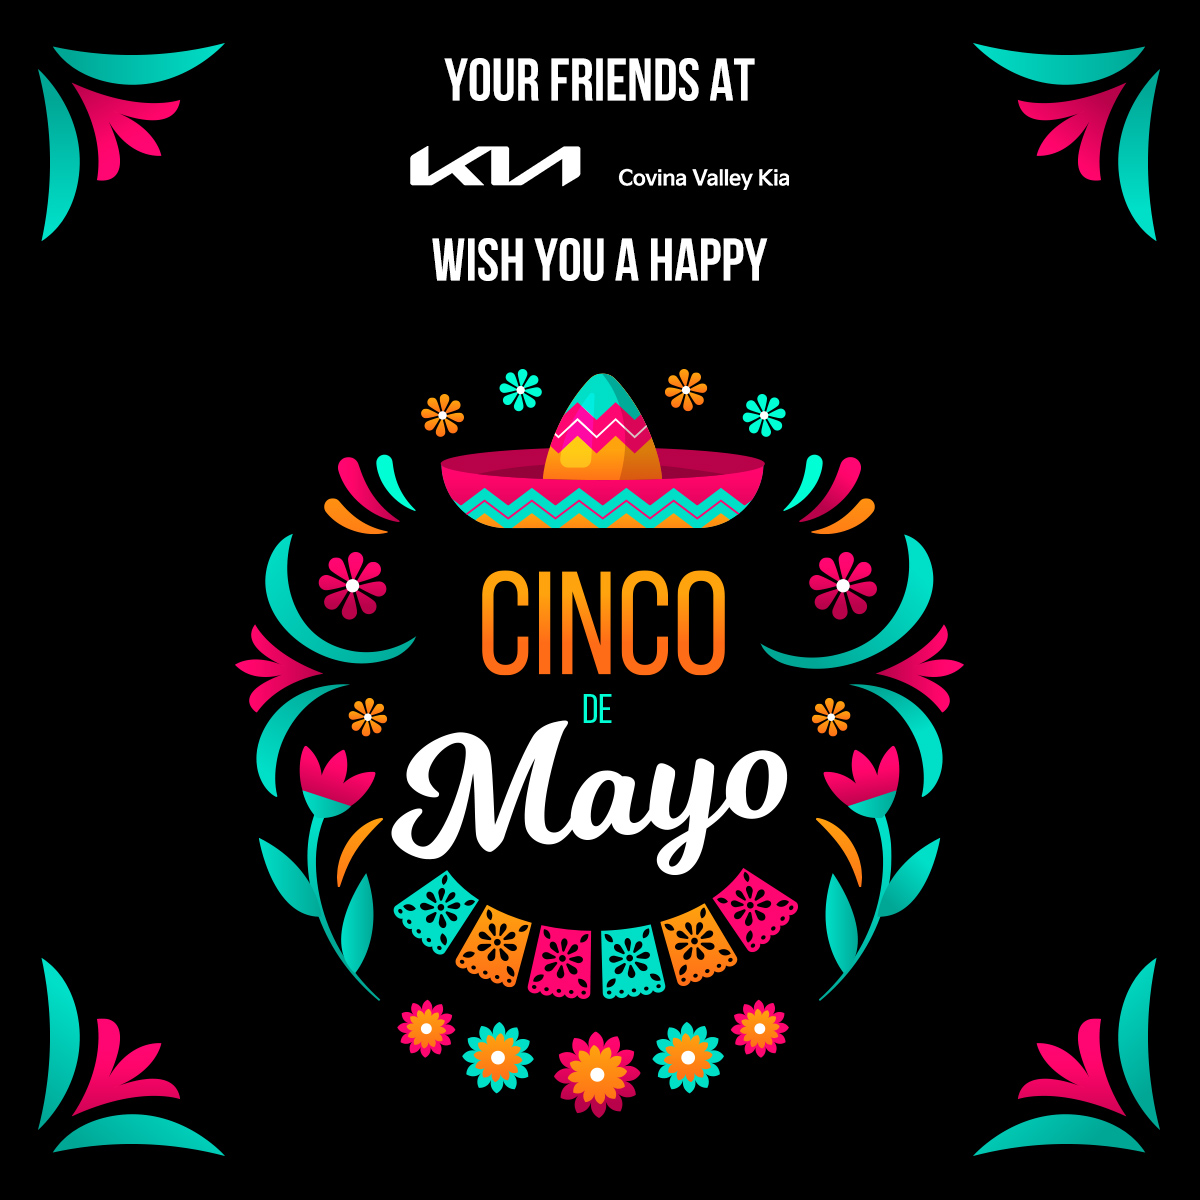 Happy Cinco De Mayo from your friends at Covina Valley Kia! 🎉

Stop by and check out our new arrivals! ✨

.
.
.
#covinacalifornia #Kia #newkia #kiadealership #kia #customerservice #customersatisfaction #5starcustomerservice #cincodemayo #cincodemayo #cincodemayo2023